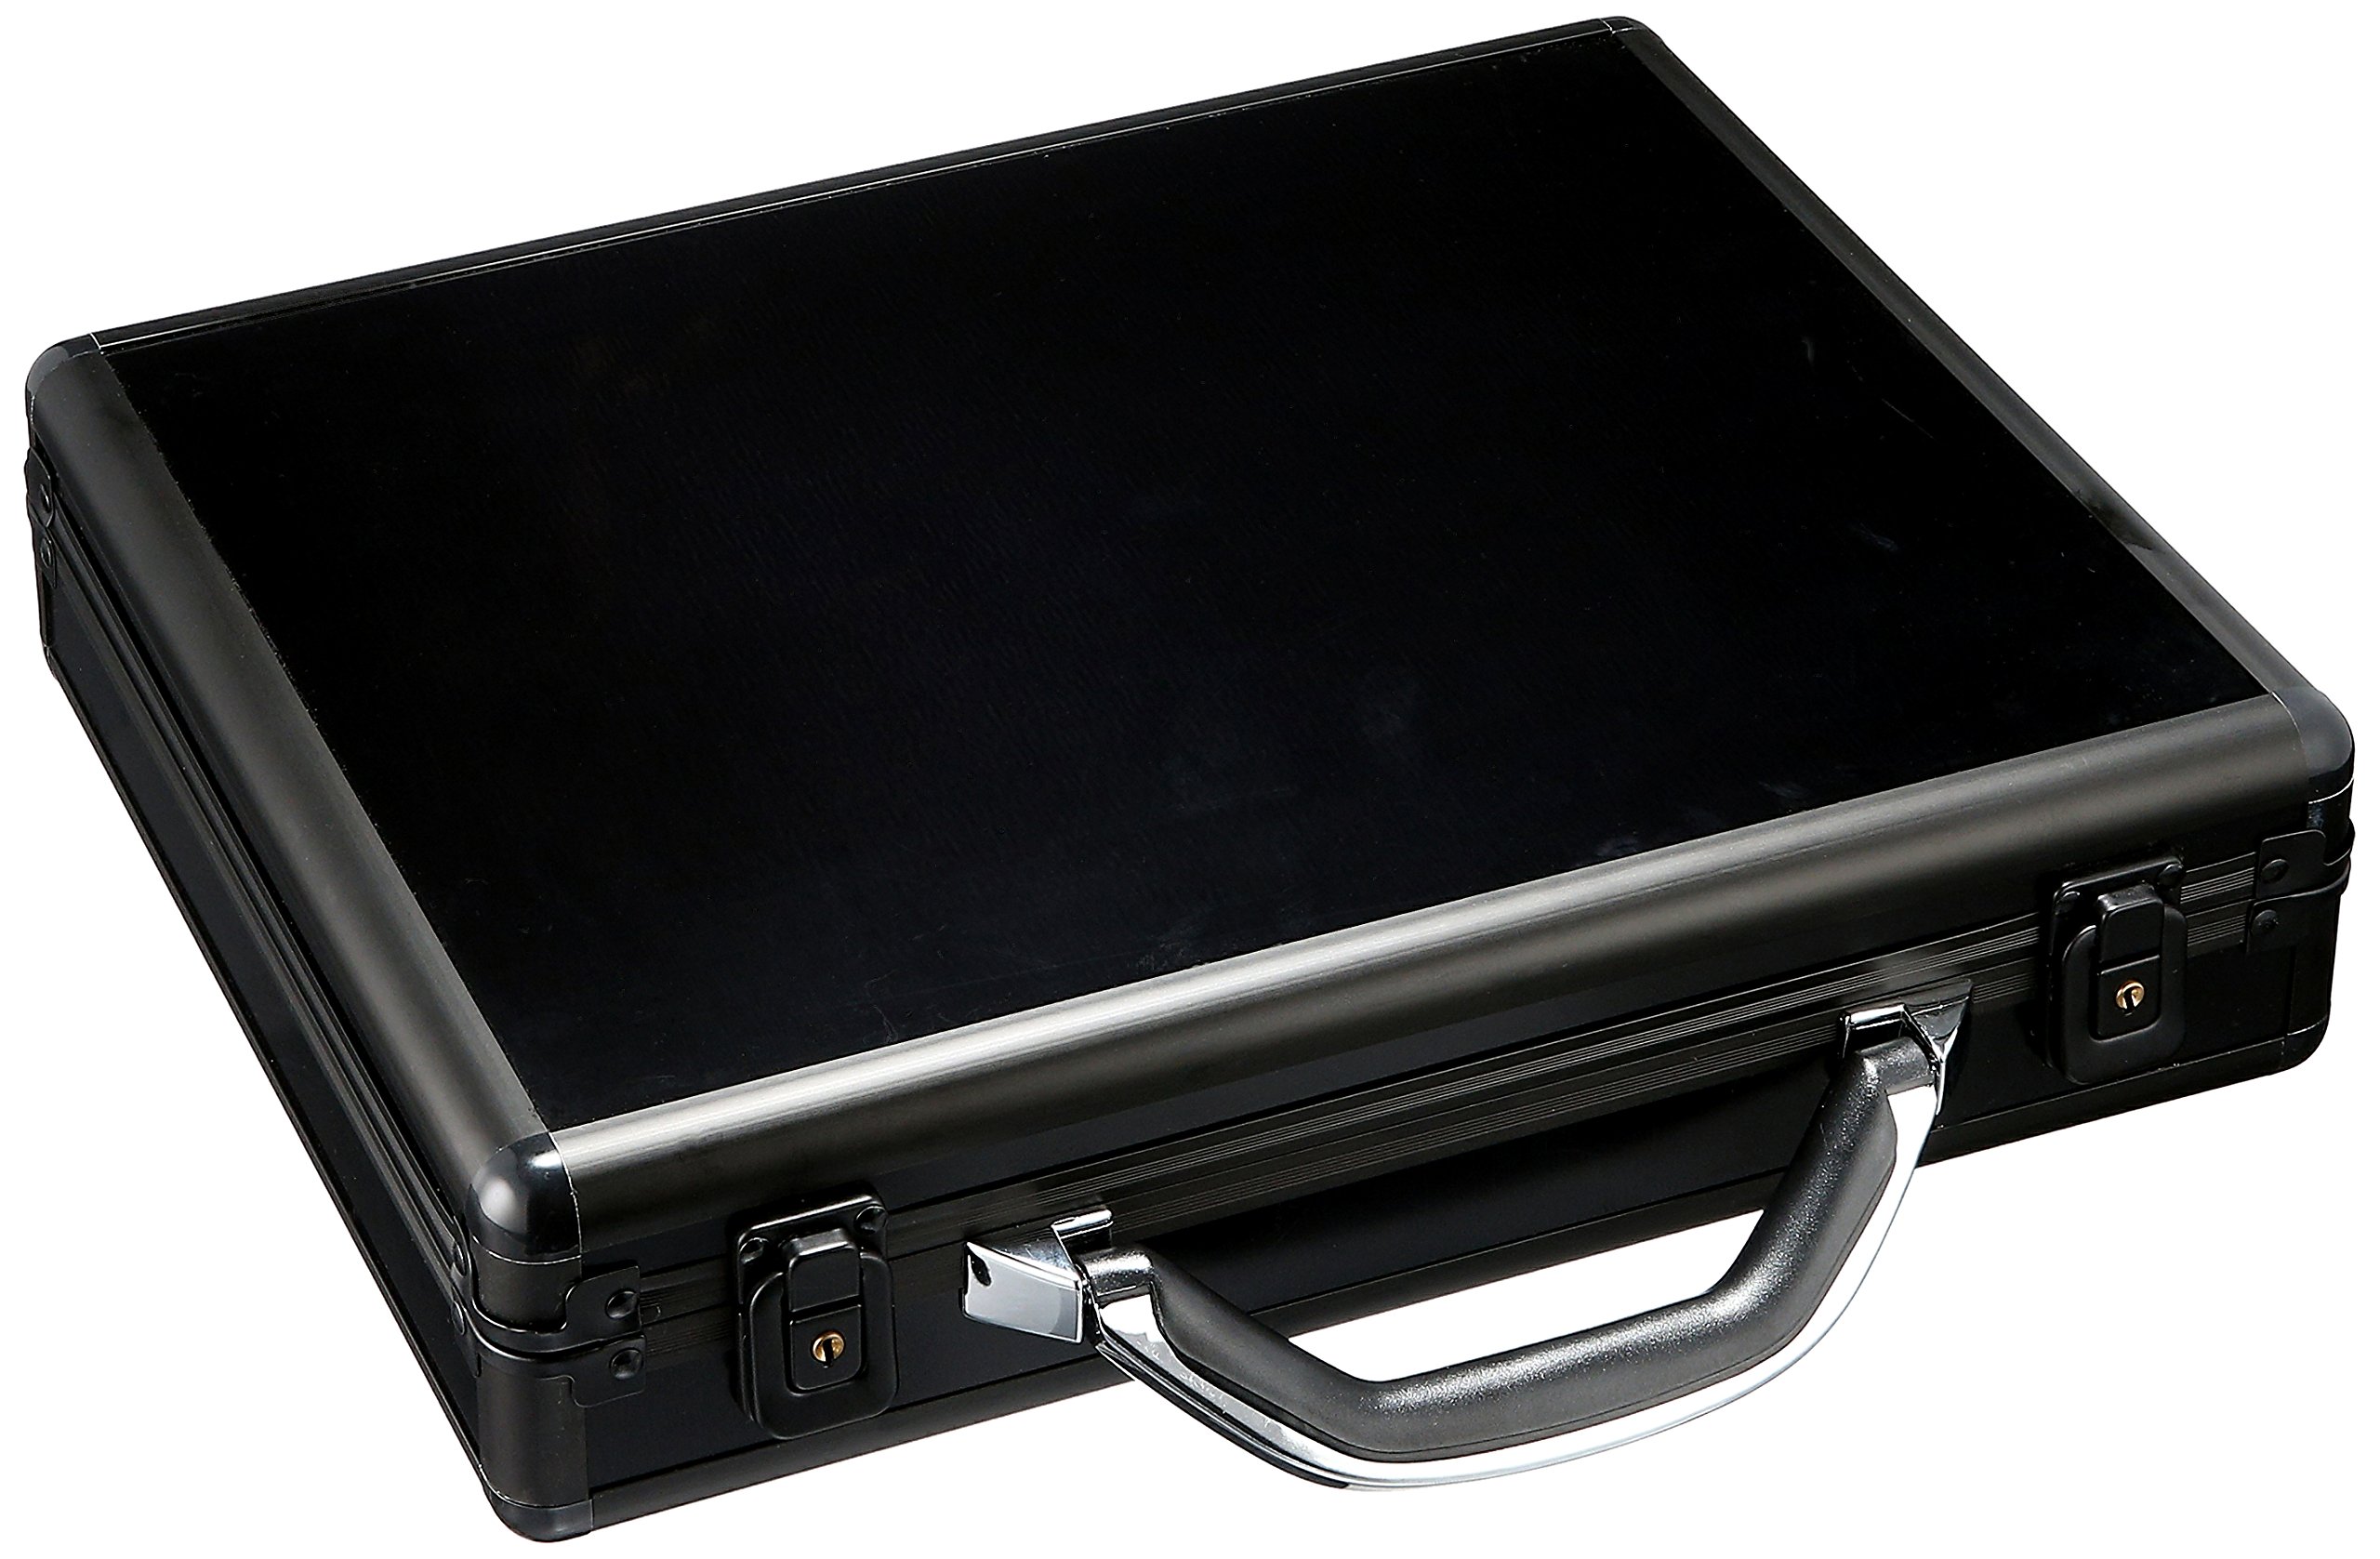 Watch Case Aluminum Briefcase for 18 Large Watches (Black)